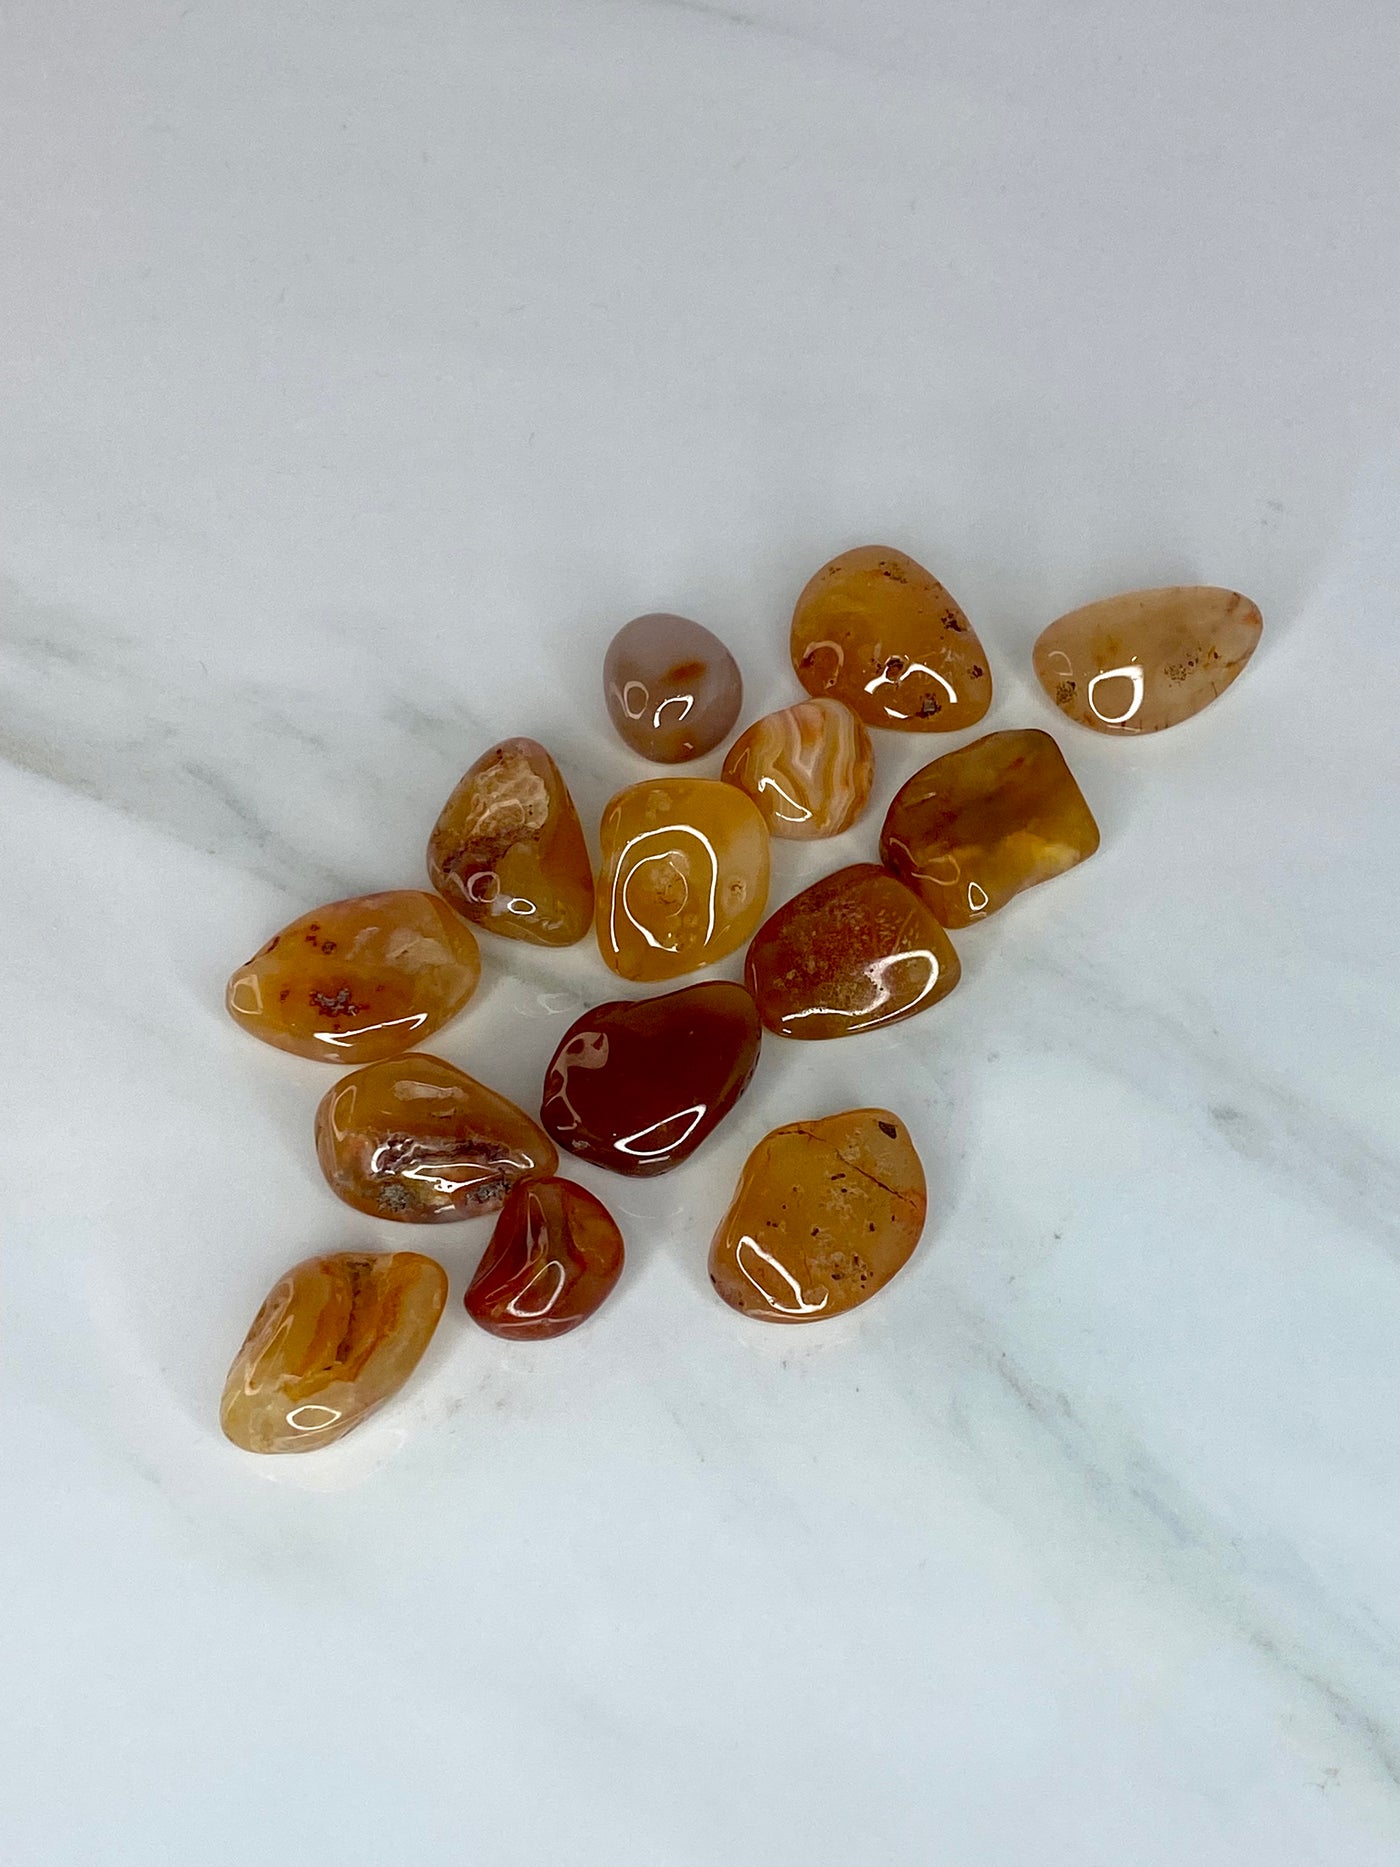 CARNELIAN - The stone for passion & sexuality!